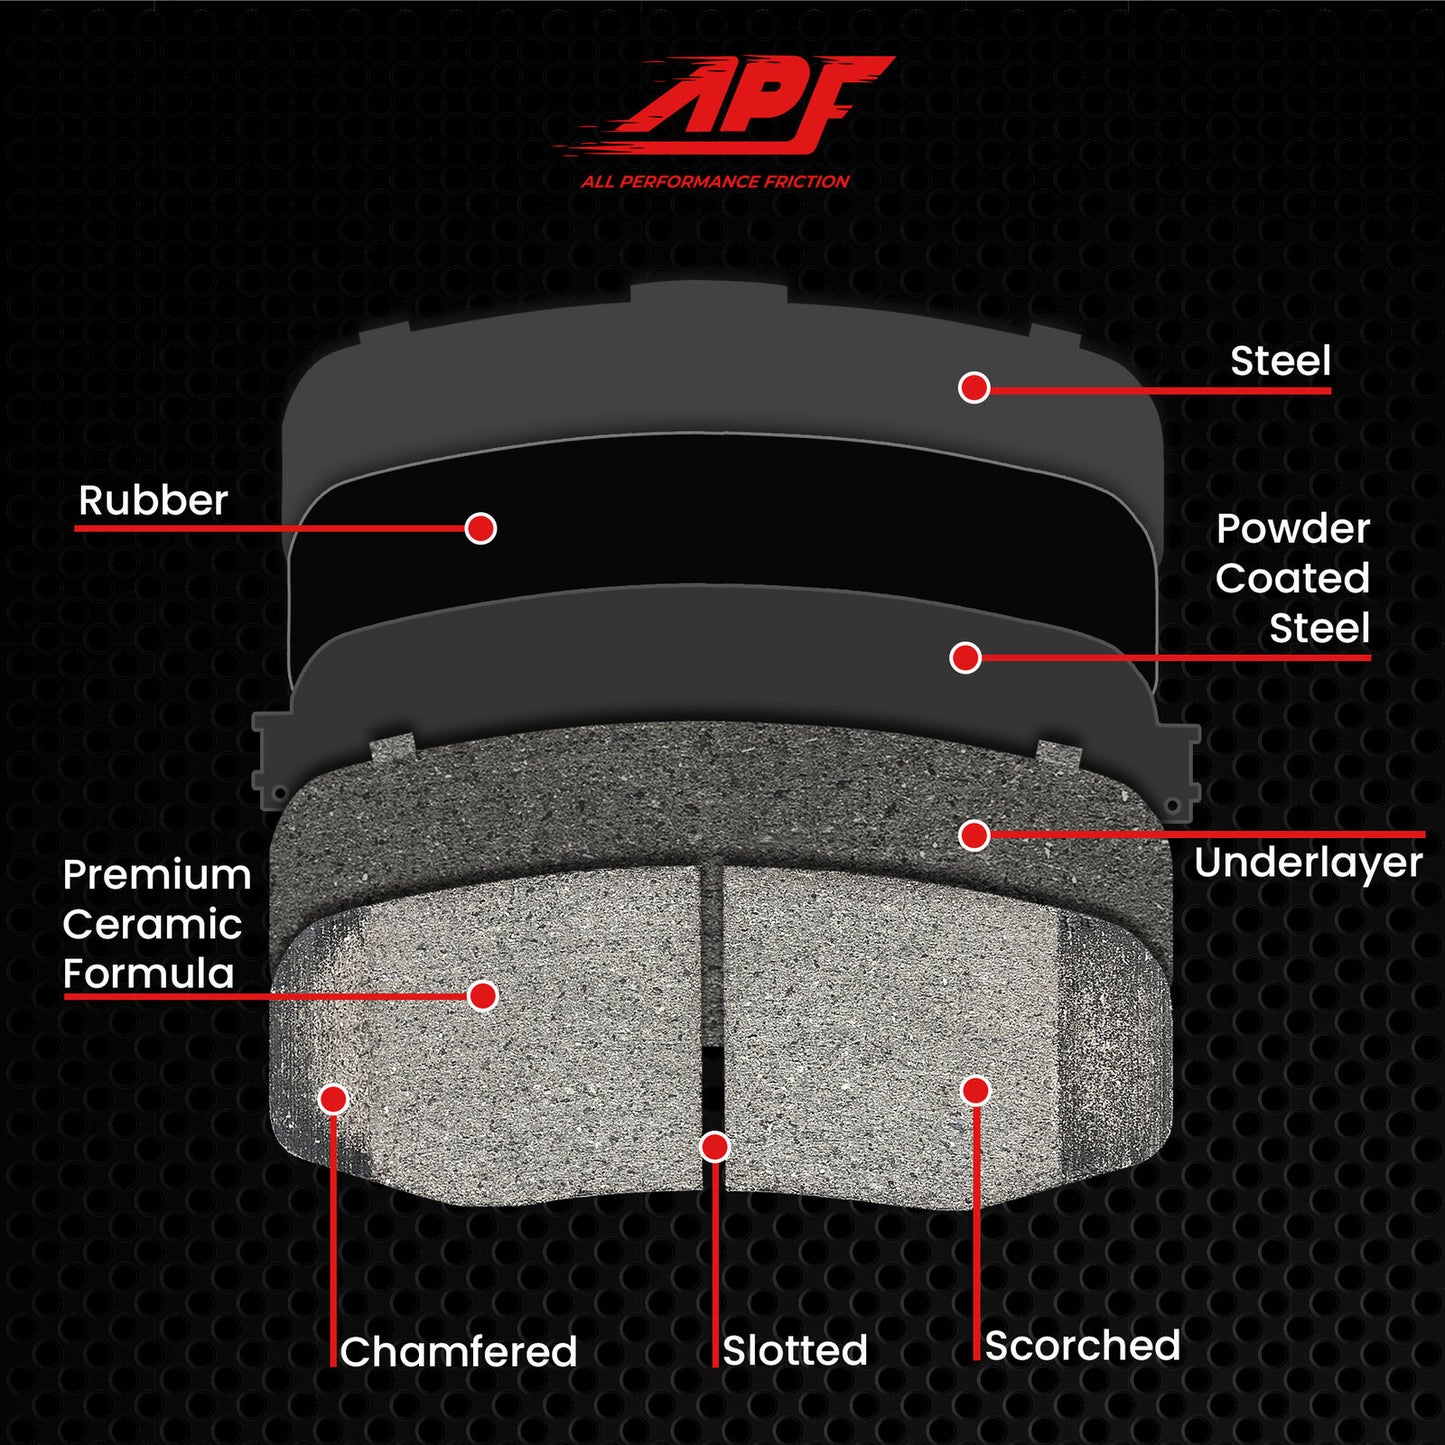 APF All Performance Friction Front Rotors and Pads Half Kit compatible with INFINITI Q70L 2015-2019 Zinc Drilled Slotted Rotors with Ceramic Carbon Fiber Brake Pads | $432.73